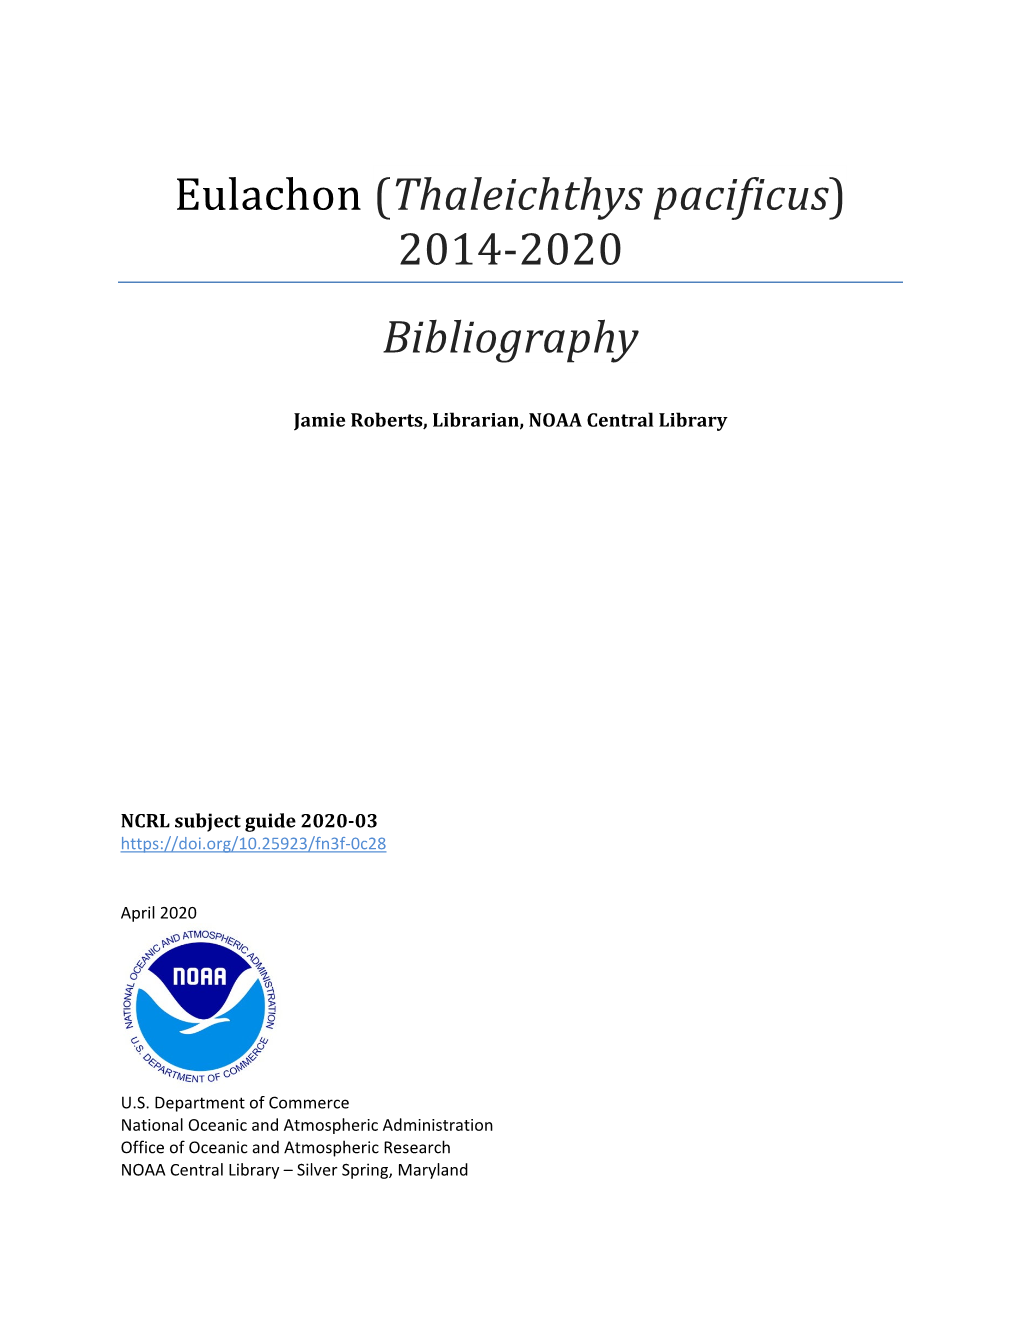 Eulachon (Thaleichthys Pacificus) 2014-2020 Bibliography